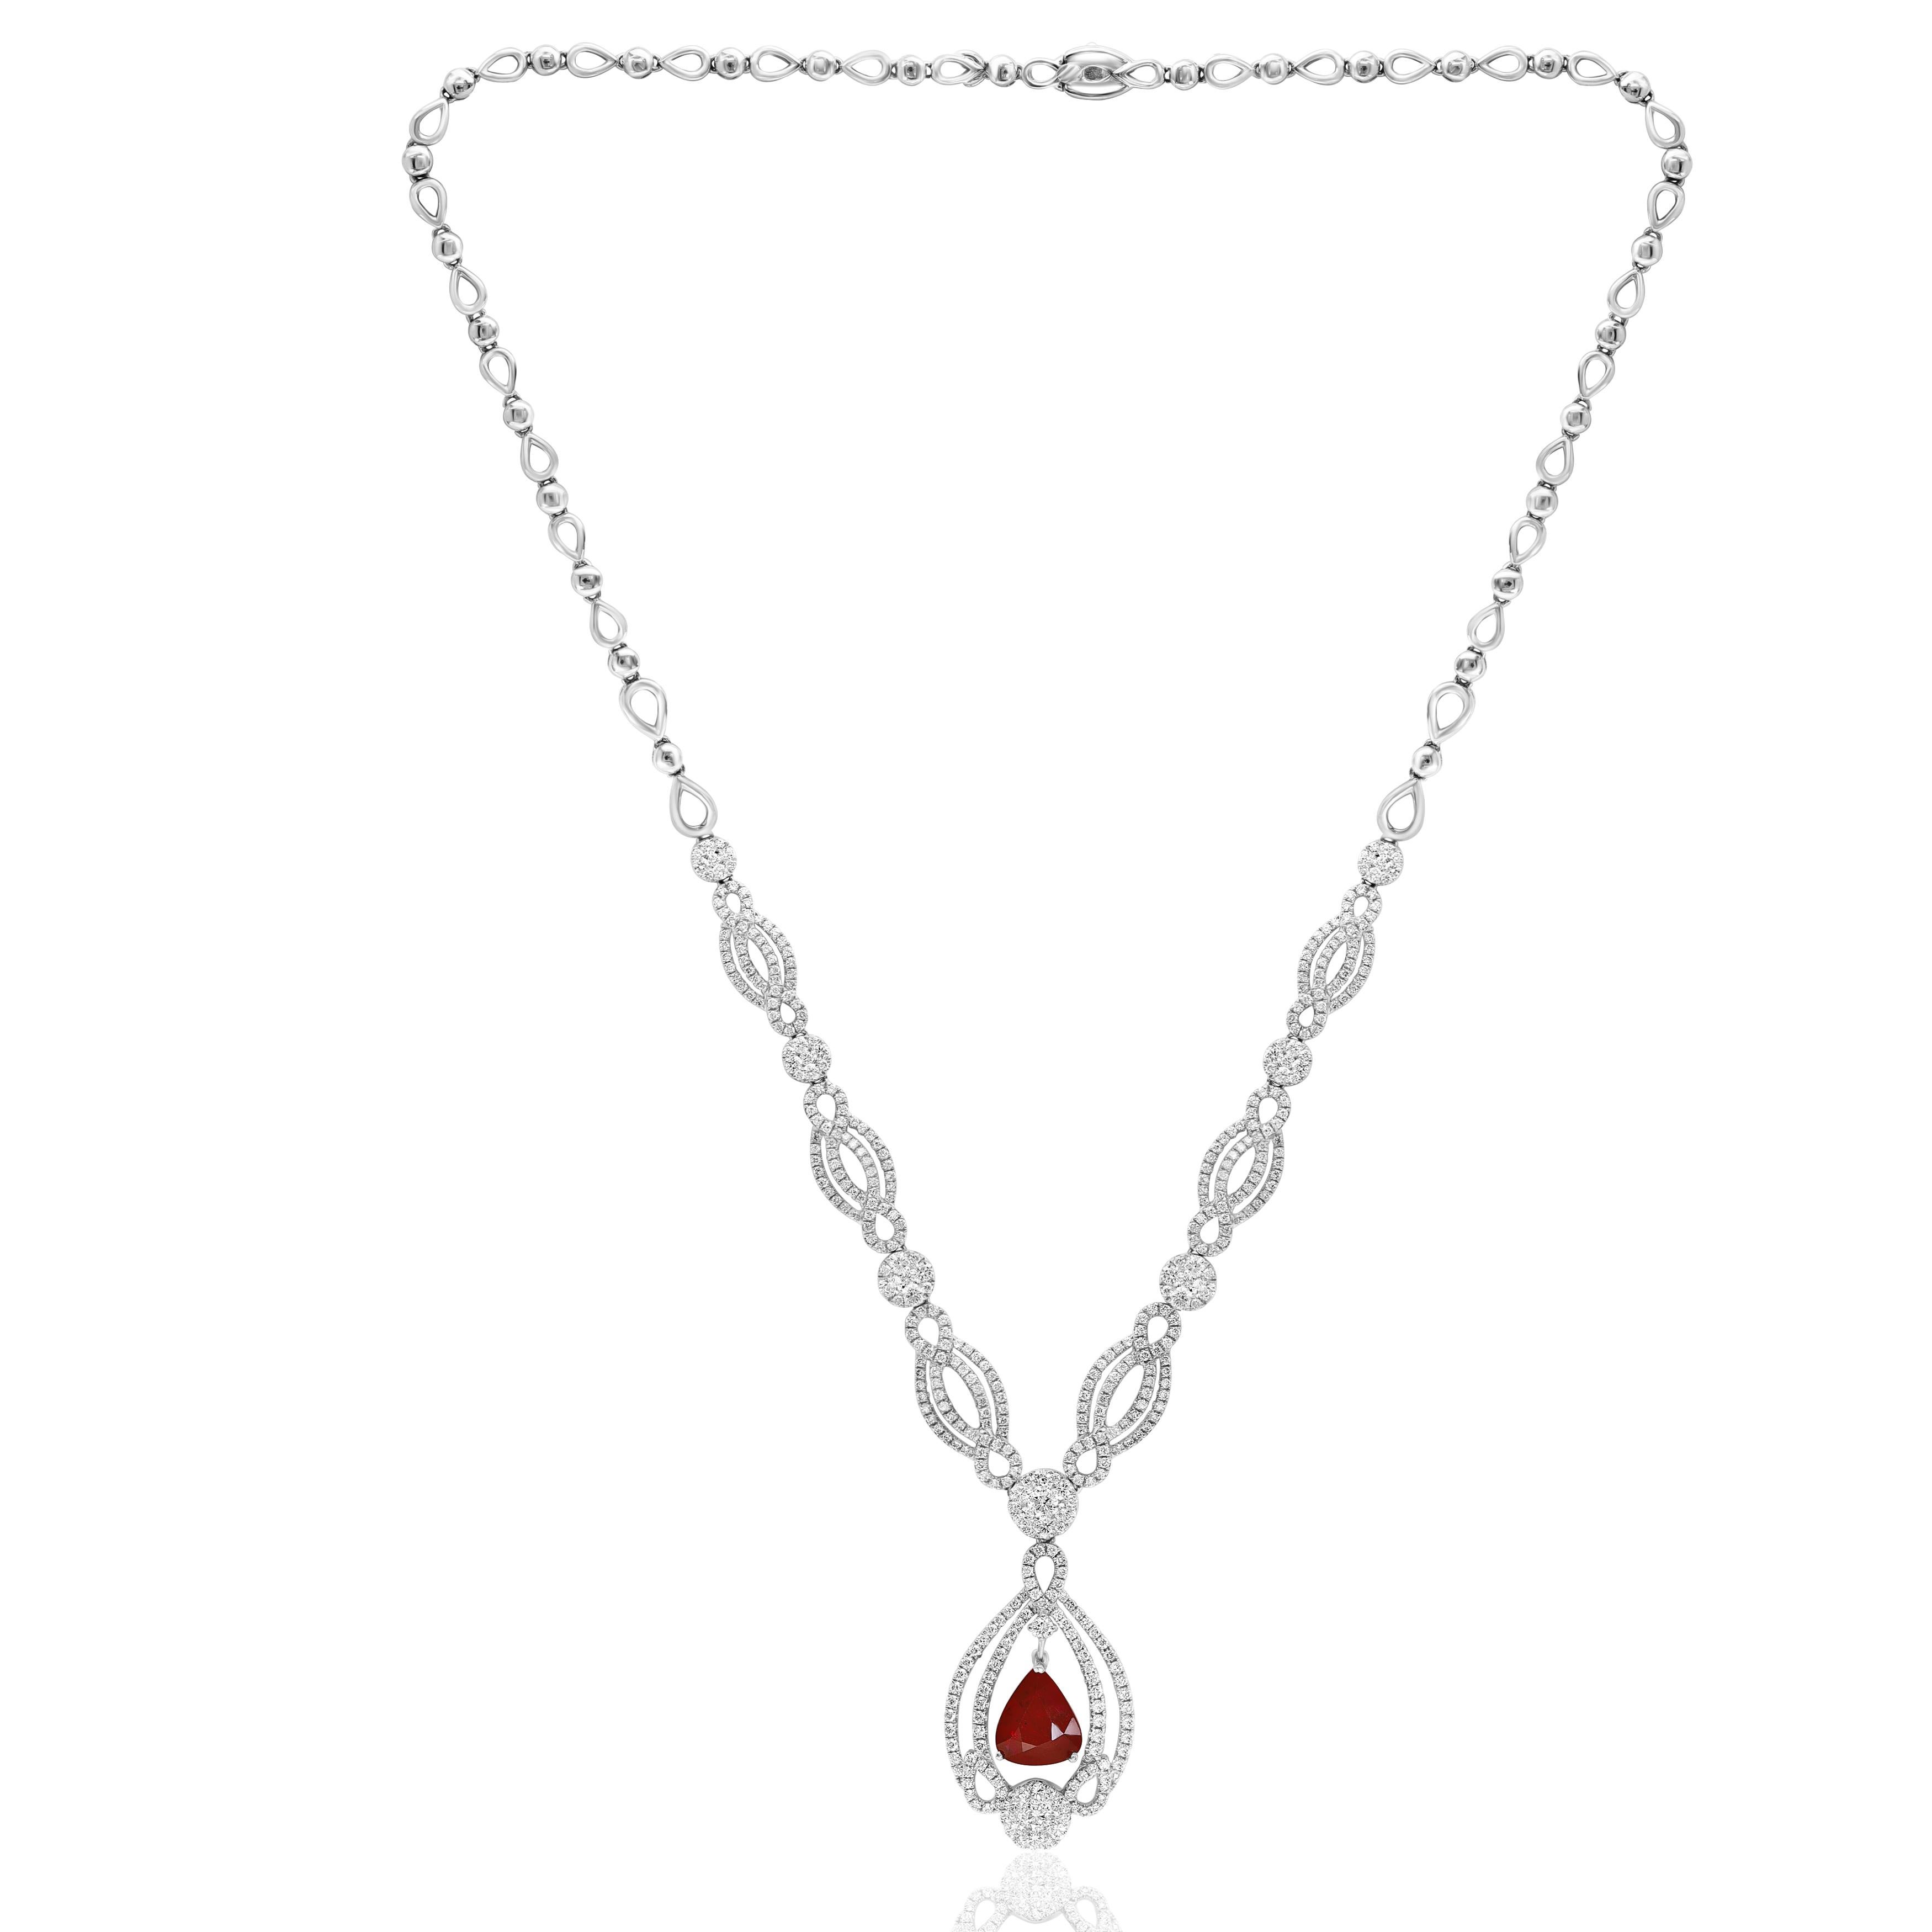 A unique and chic necklace showcasing a drop pendant in an open work design. Radiant Pear Shape Ruby weighs 3.52 carats, and 474 accent diamonds surrounding the ruby weigh approx 4.83 carats in total. Made in 18-karat white gold.

Style is available